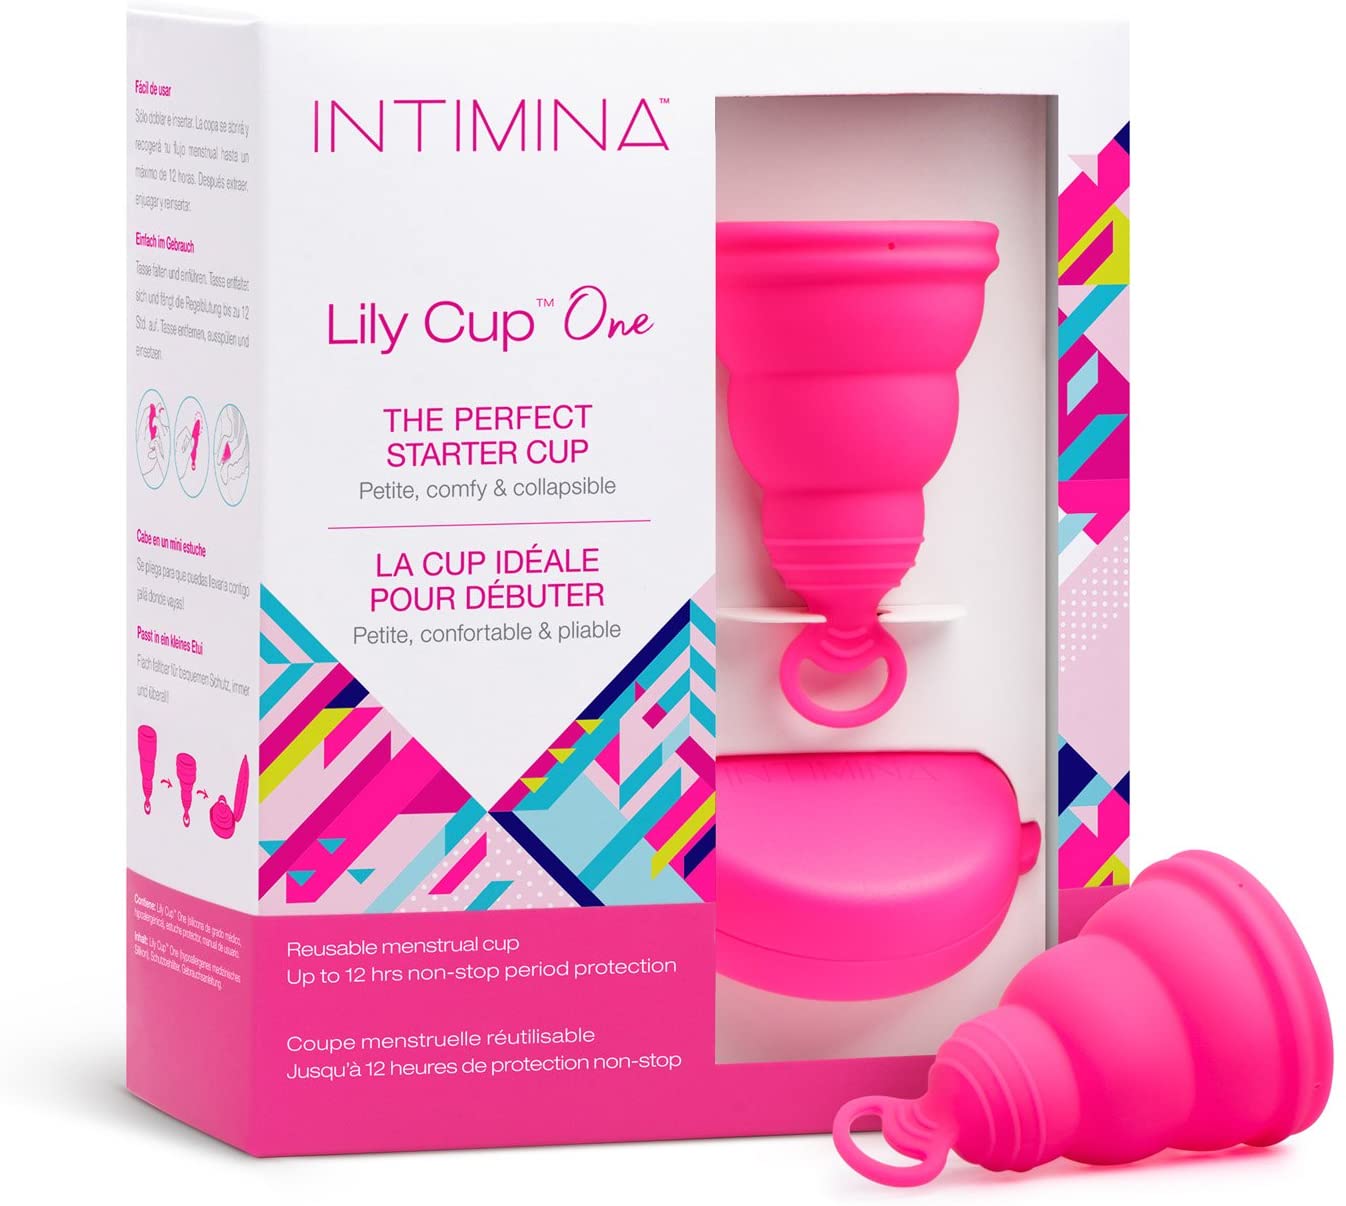 Lily Cup One The Perfect Starter Cup #6065 - Intimina